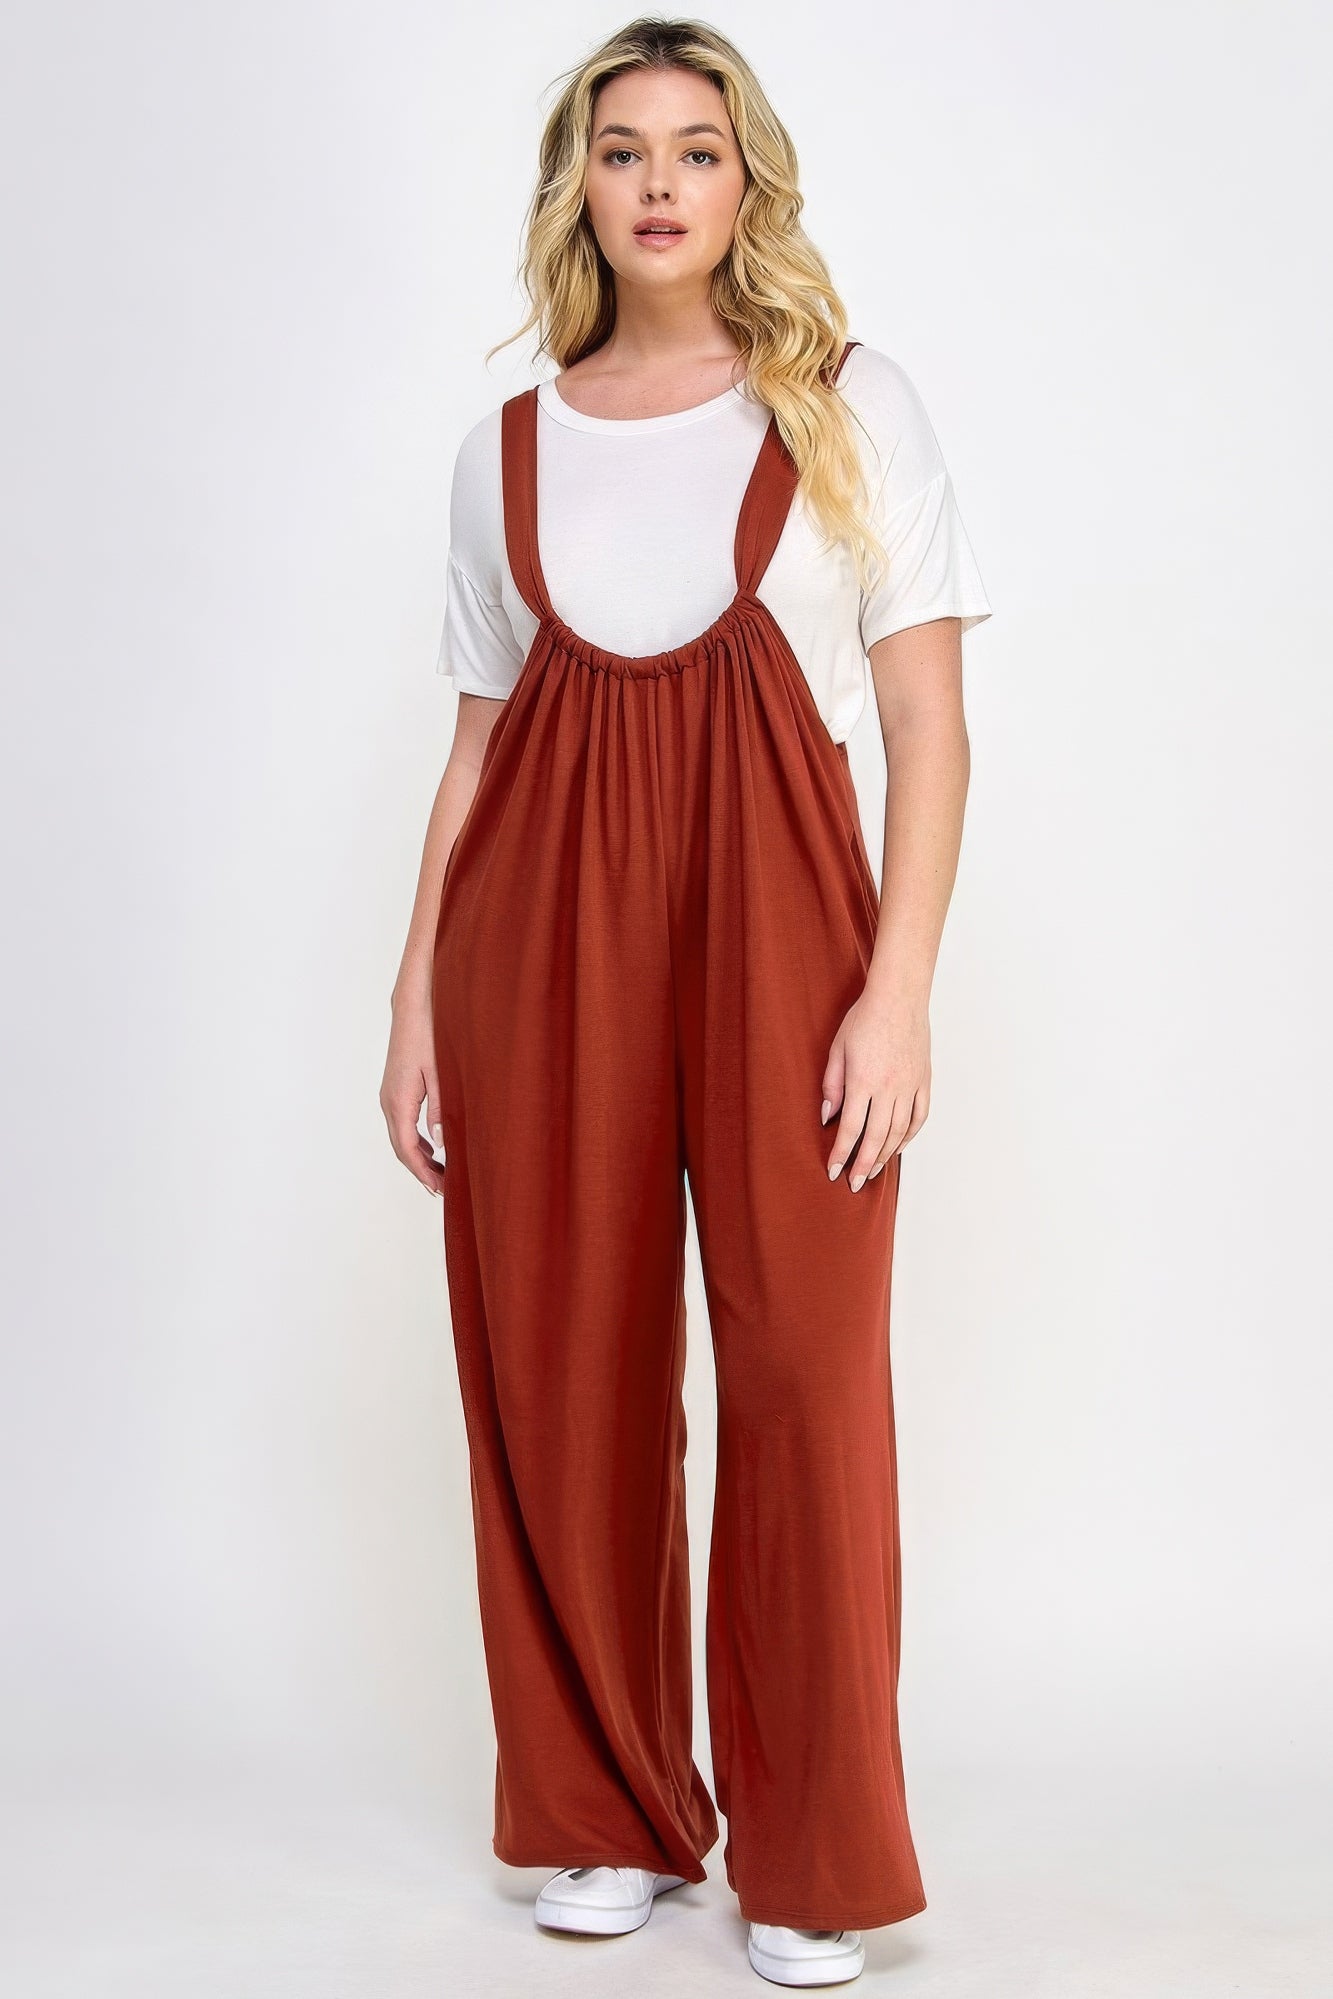 Brick - Voluptuous (+) French Terry Wide Leg Women's Plus Size Overalls Jumpsuit - womens overalls at TFC&H Co.